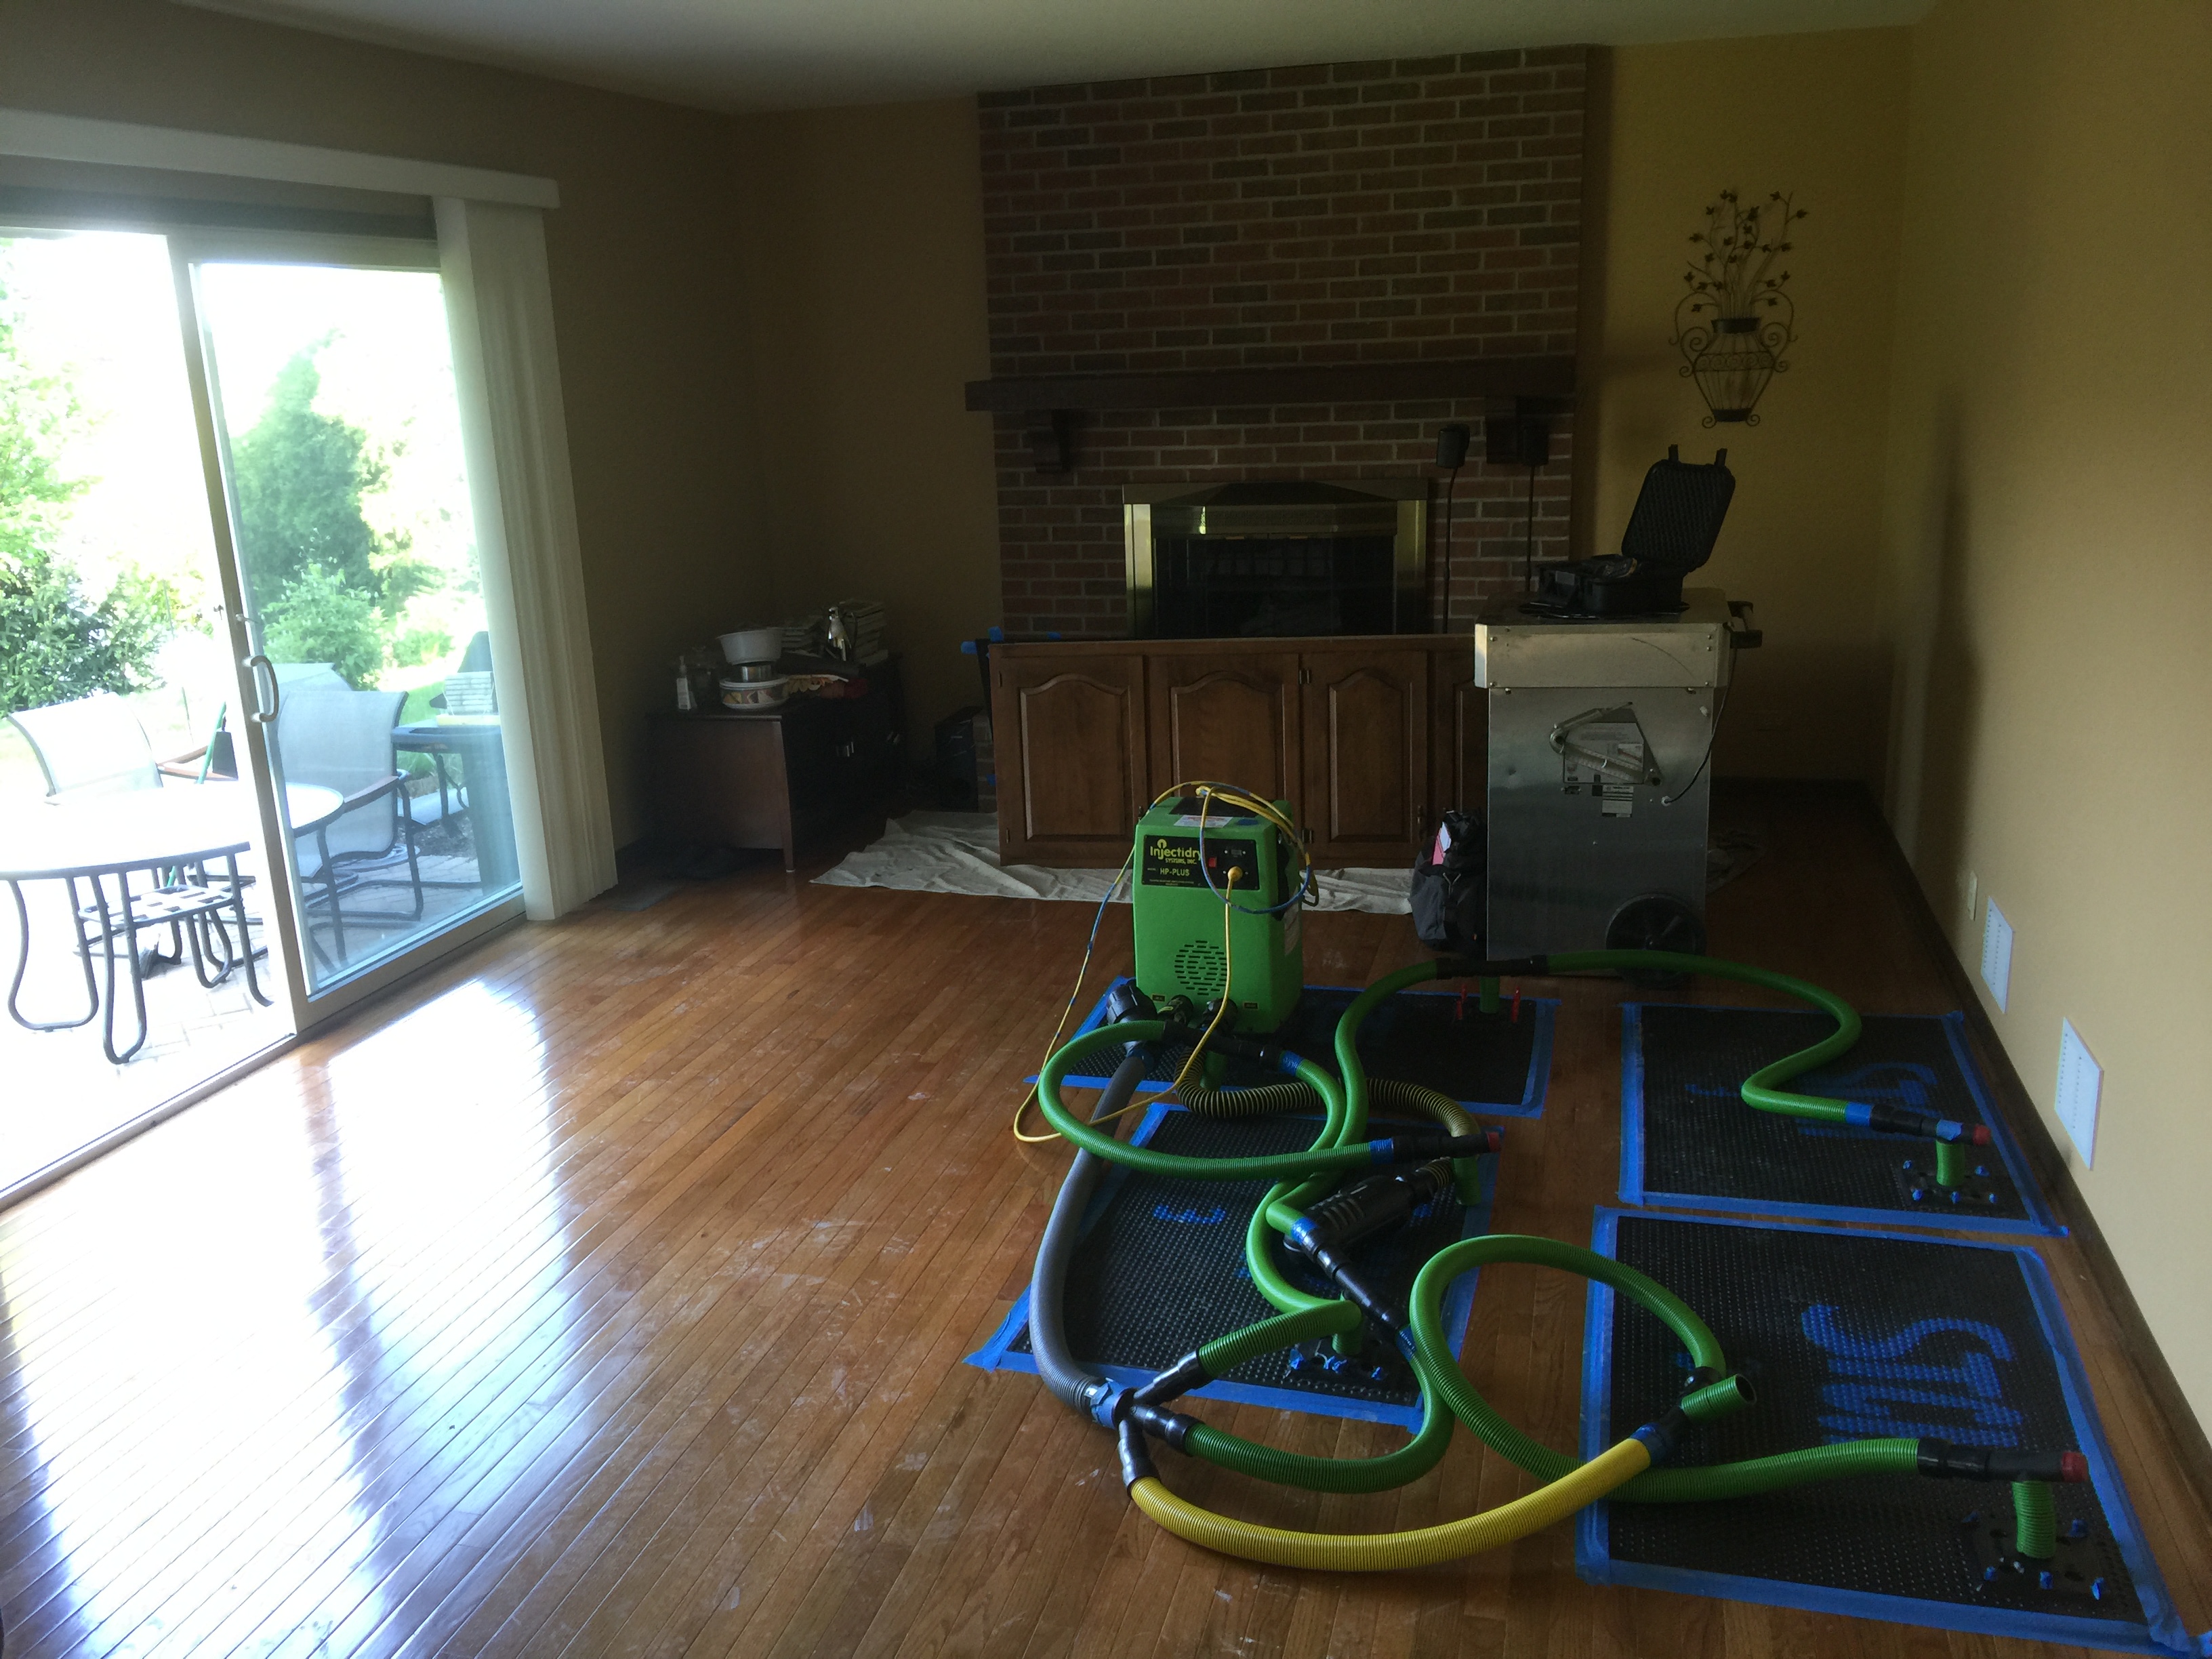 The floor mat system is in place to dry the hardwood floors!